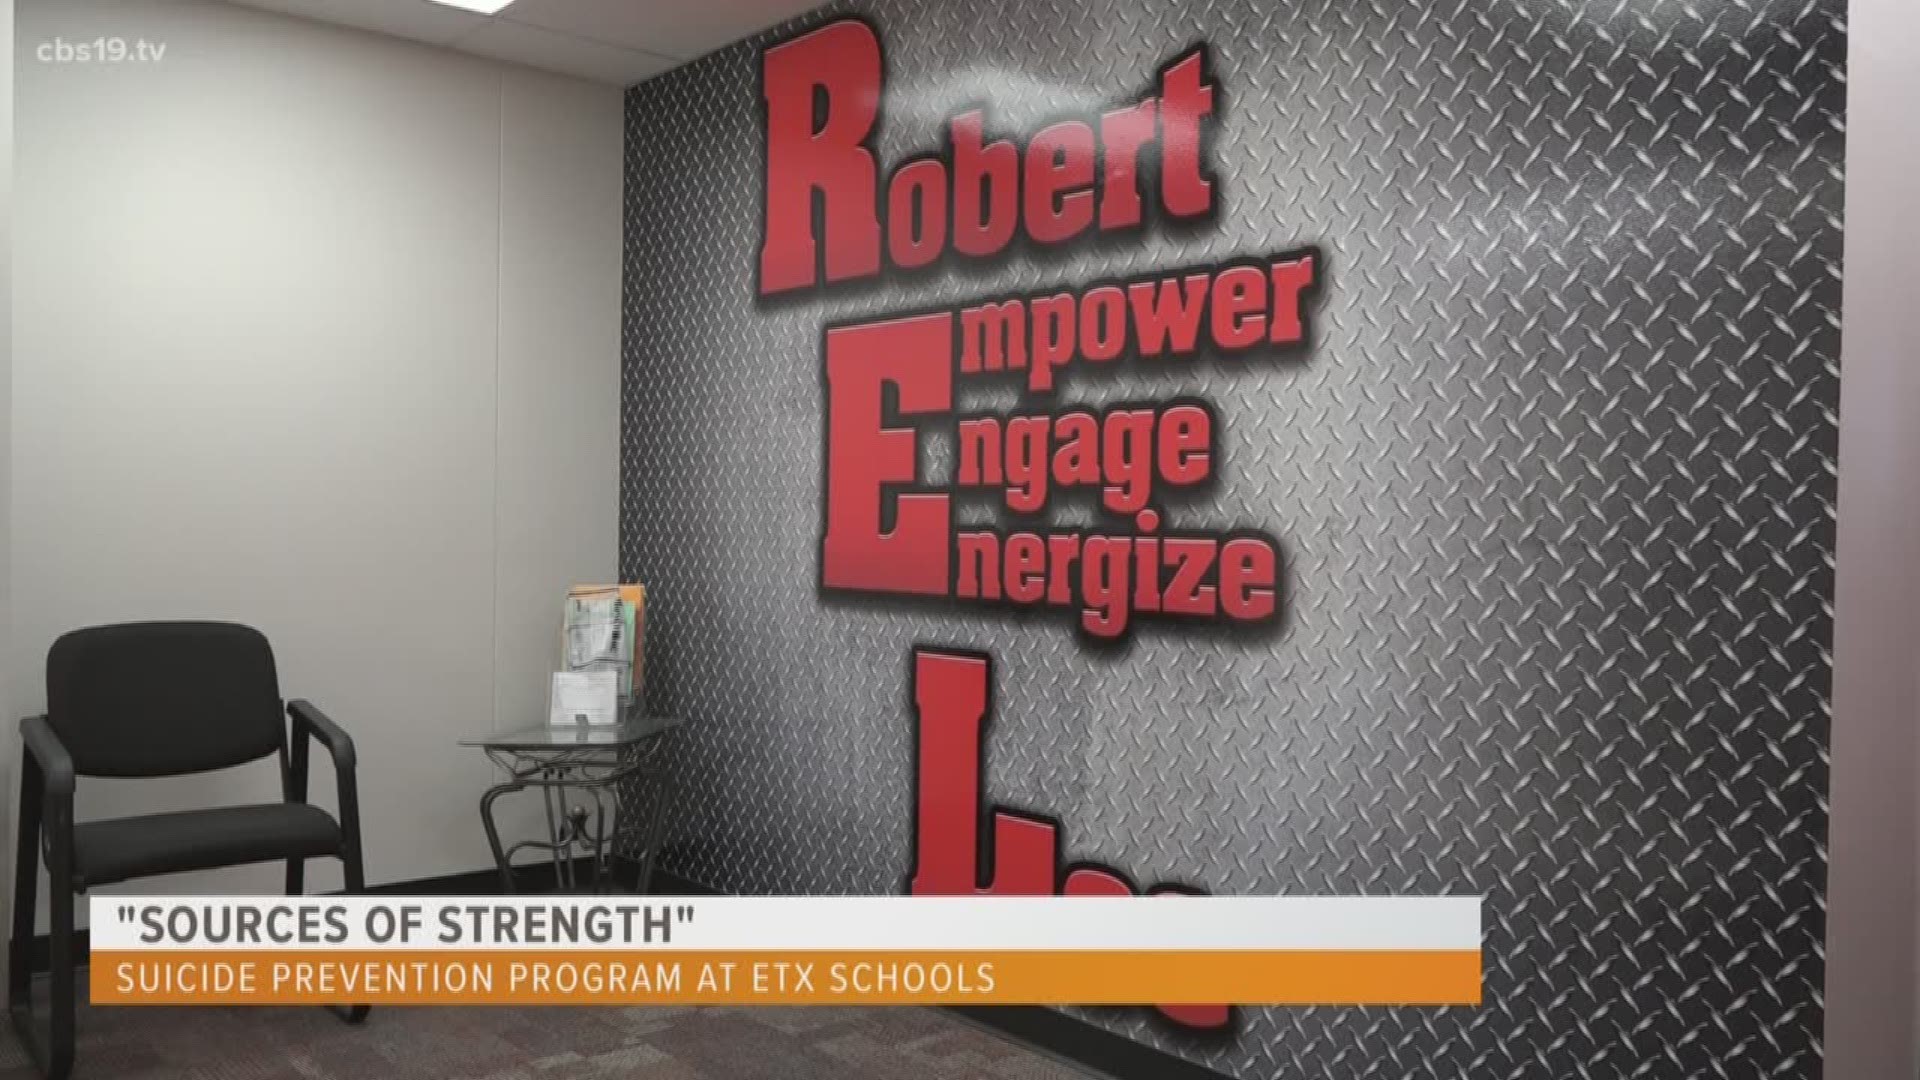 A suicide prevention program, Sources of Strength will be introduced to Robert E. Lee High School and one other East Texas school in the fall of 2019. Recent studies have shown that Smith County has the highest suicide rate of the states 25 largest counties.